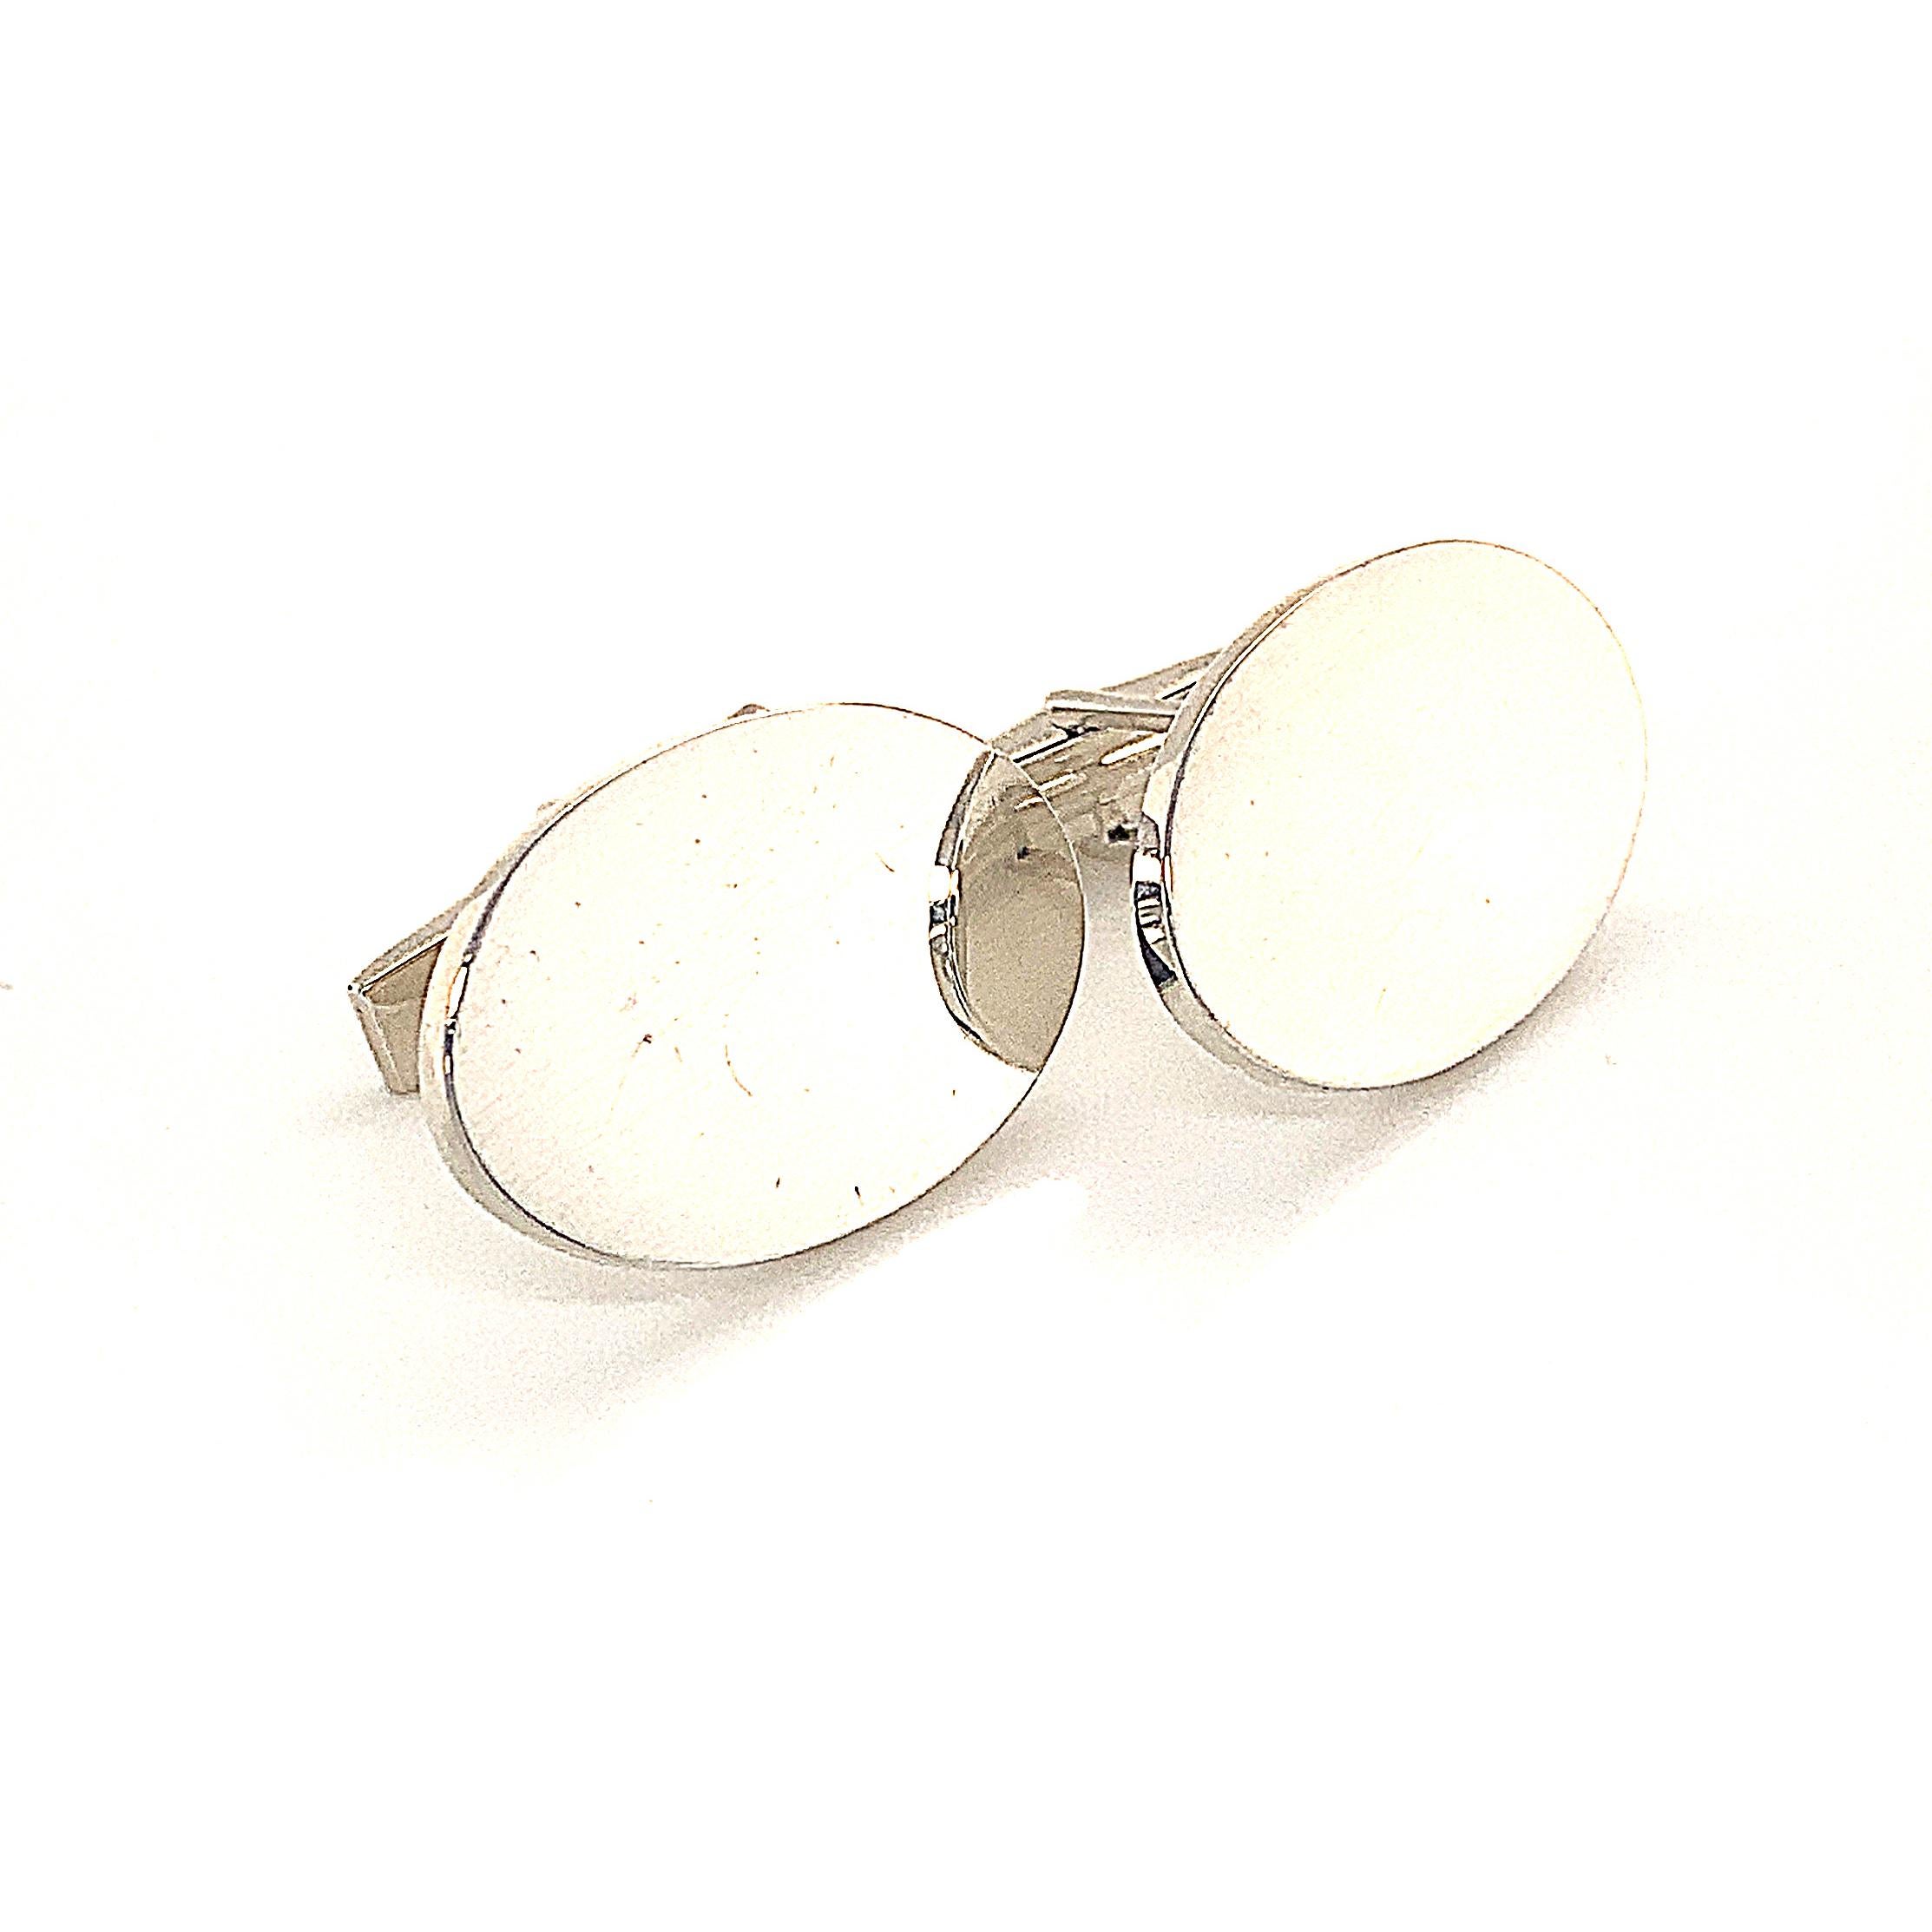 Tiffany & Co Estate Sterling Silver Cufflinks 18.4 Grams TIF113
 
These elegant Authentic Tiffany & Co Men's Cufflinks are made of sterling silver and have a weight of 18.4 grams.

TRUSTED SELLER SINCE 2002
 
PLEASE SEE OUR HUNDREDS OF POSITIVE